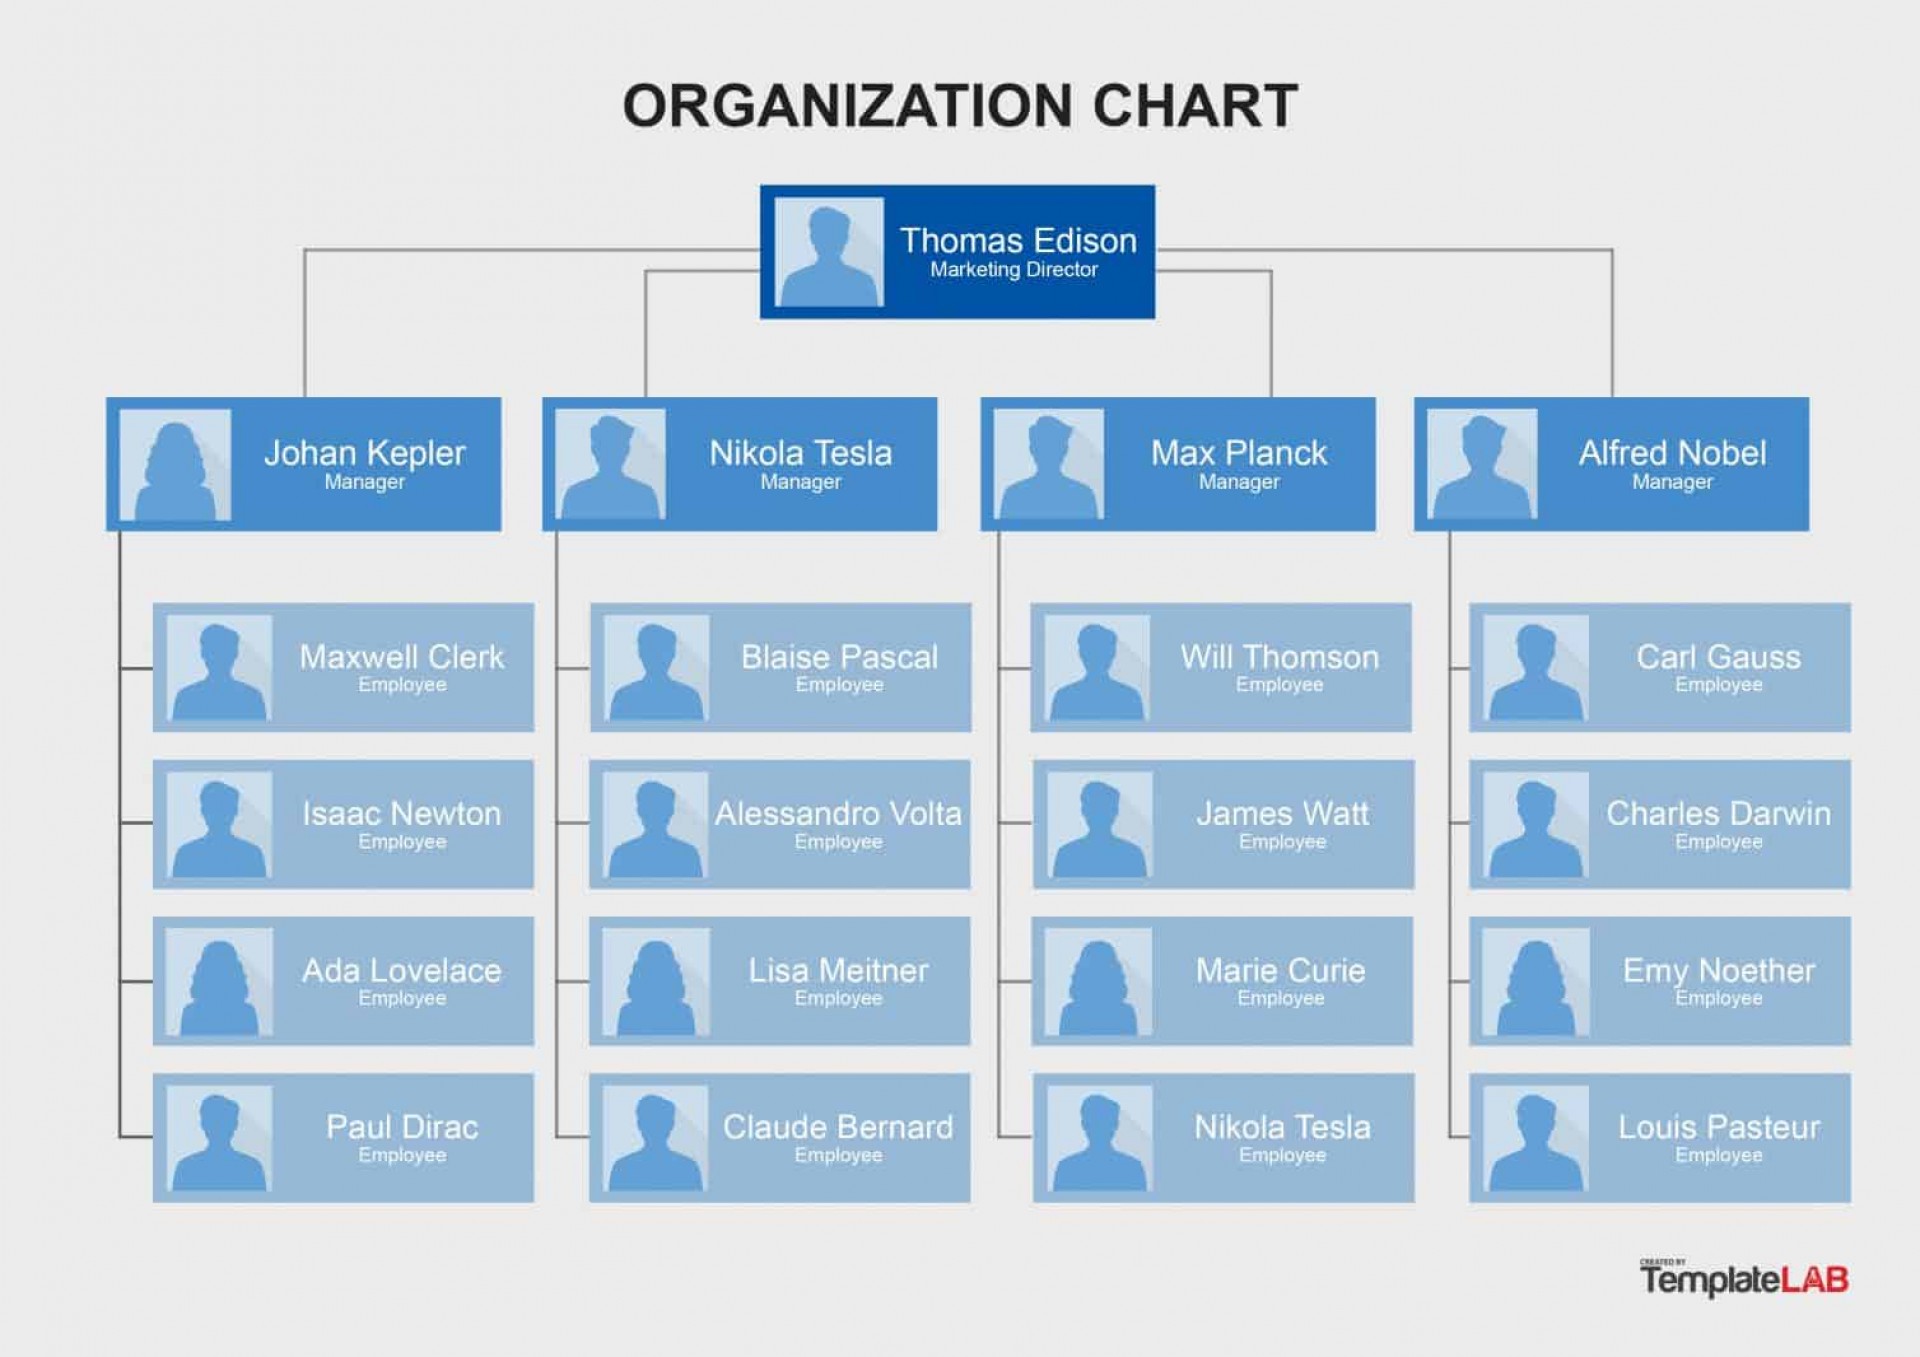 Personal Excel Templates Organizational Chart Free Download throughout Excel Templates Organizational Chart Free Download Samples